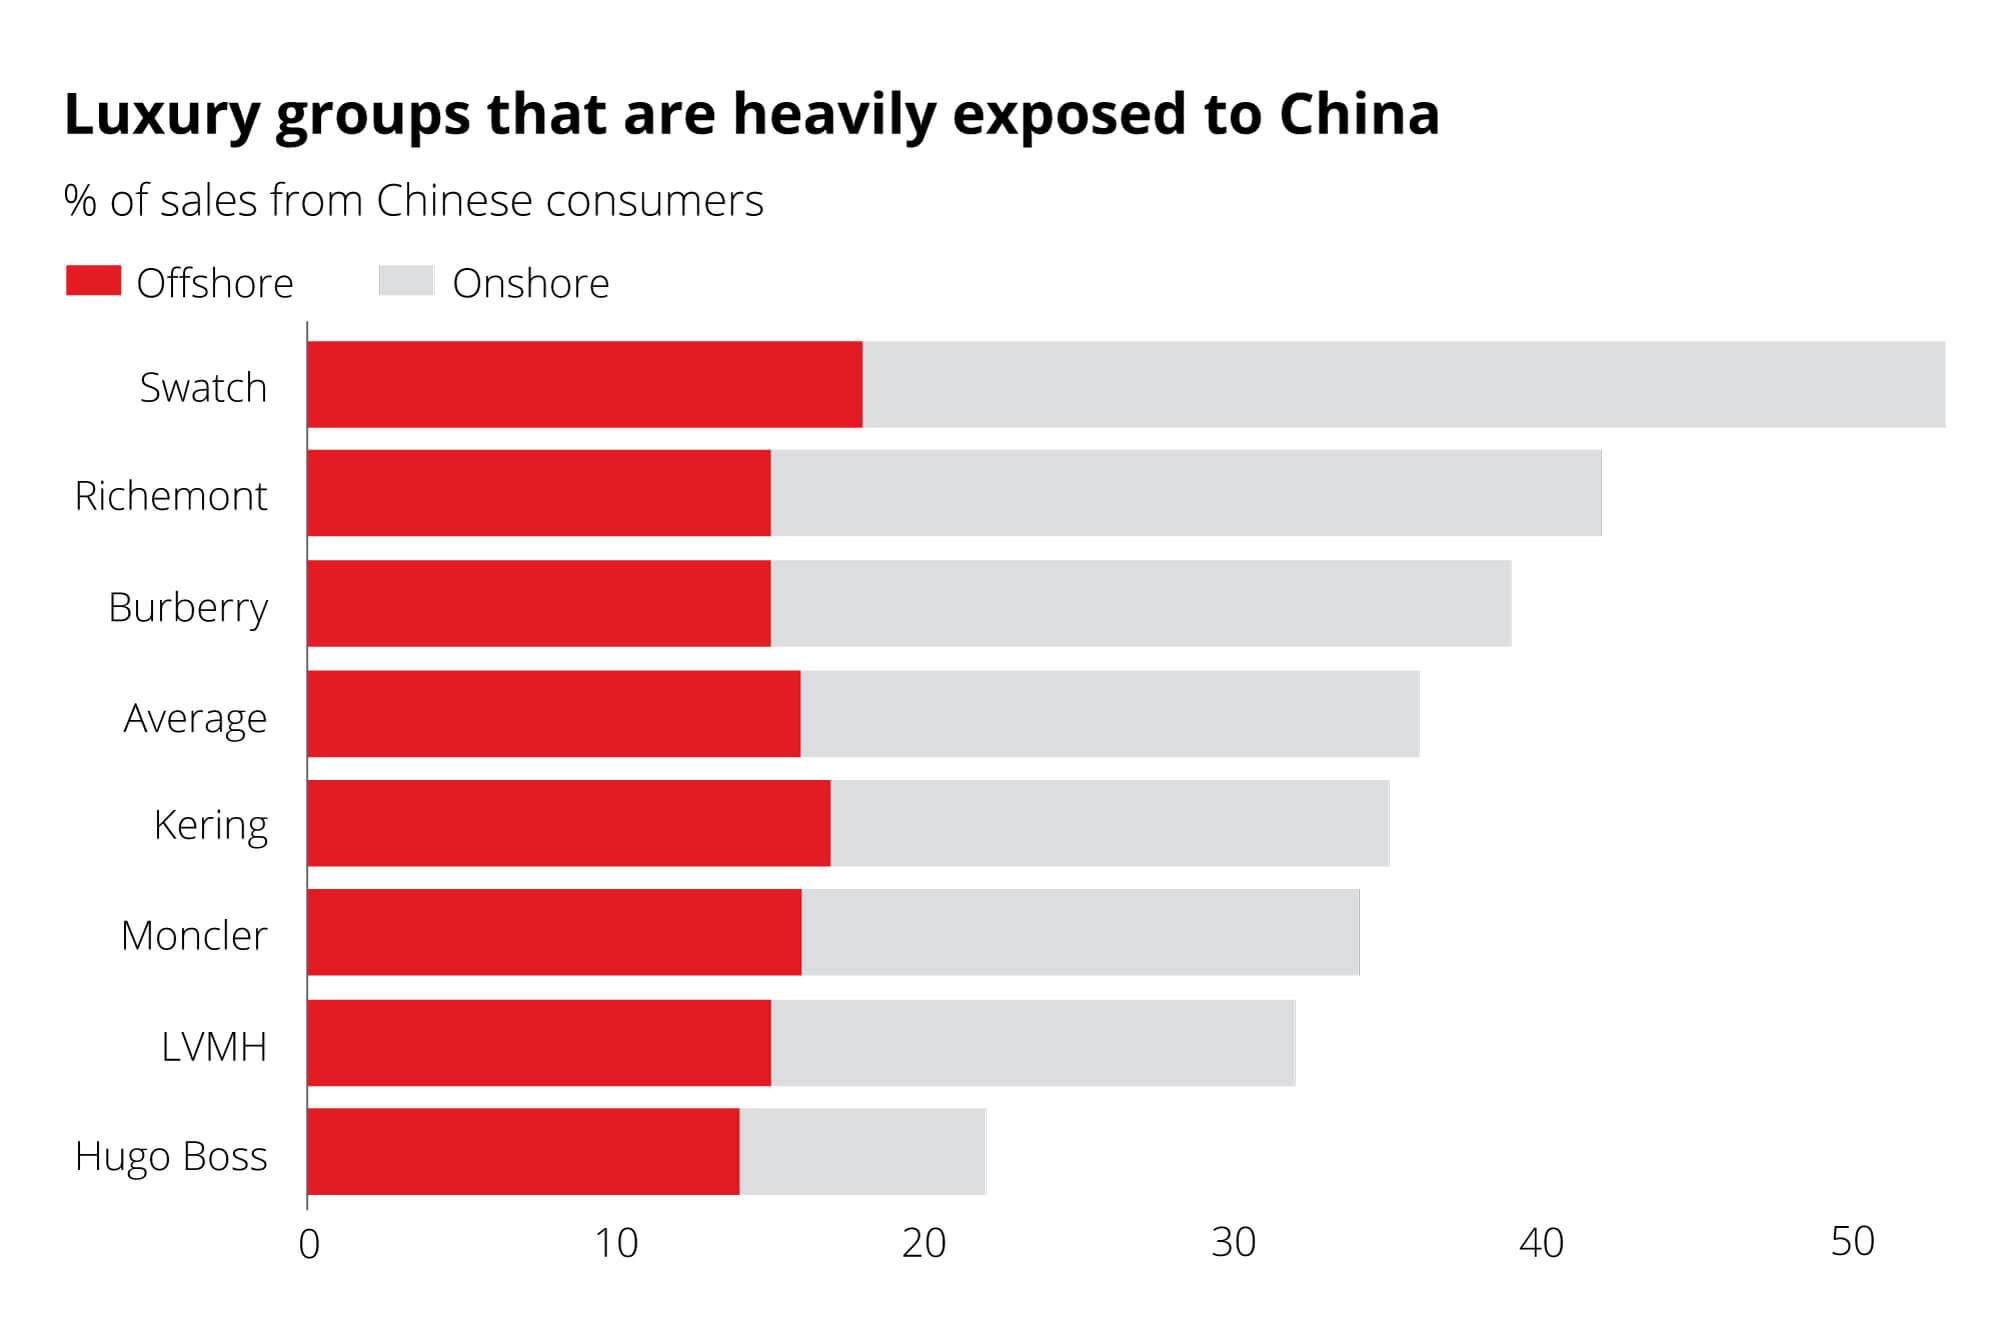 Luxury groups heavily exposed to china